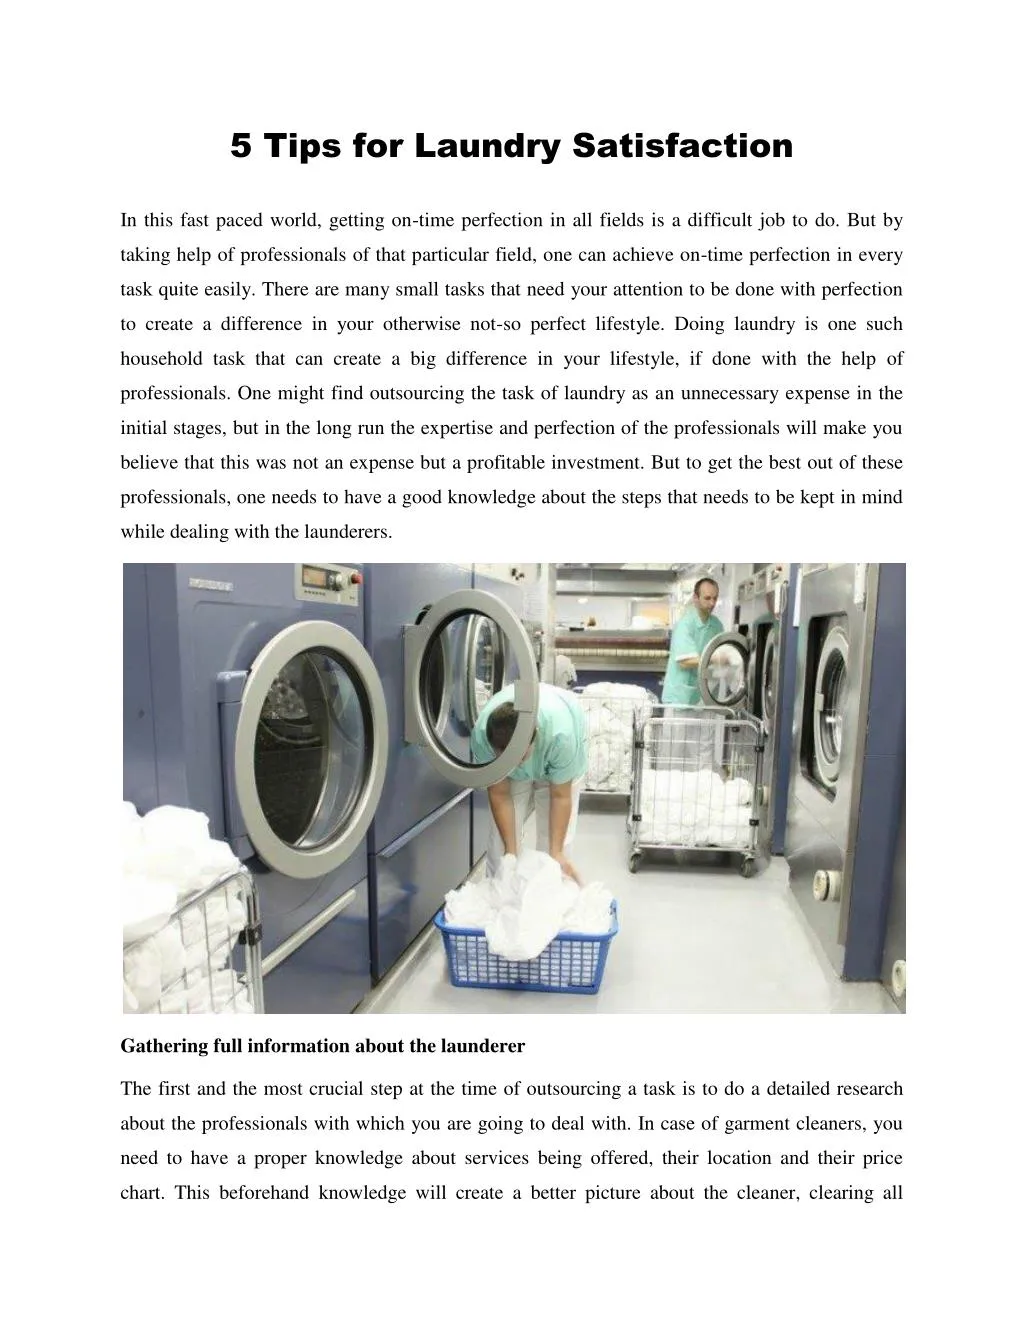 5 tips for laundry satisfaction